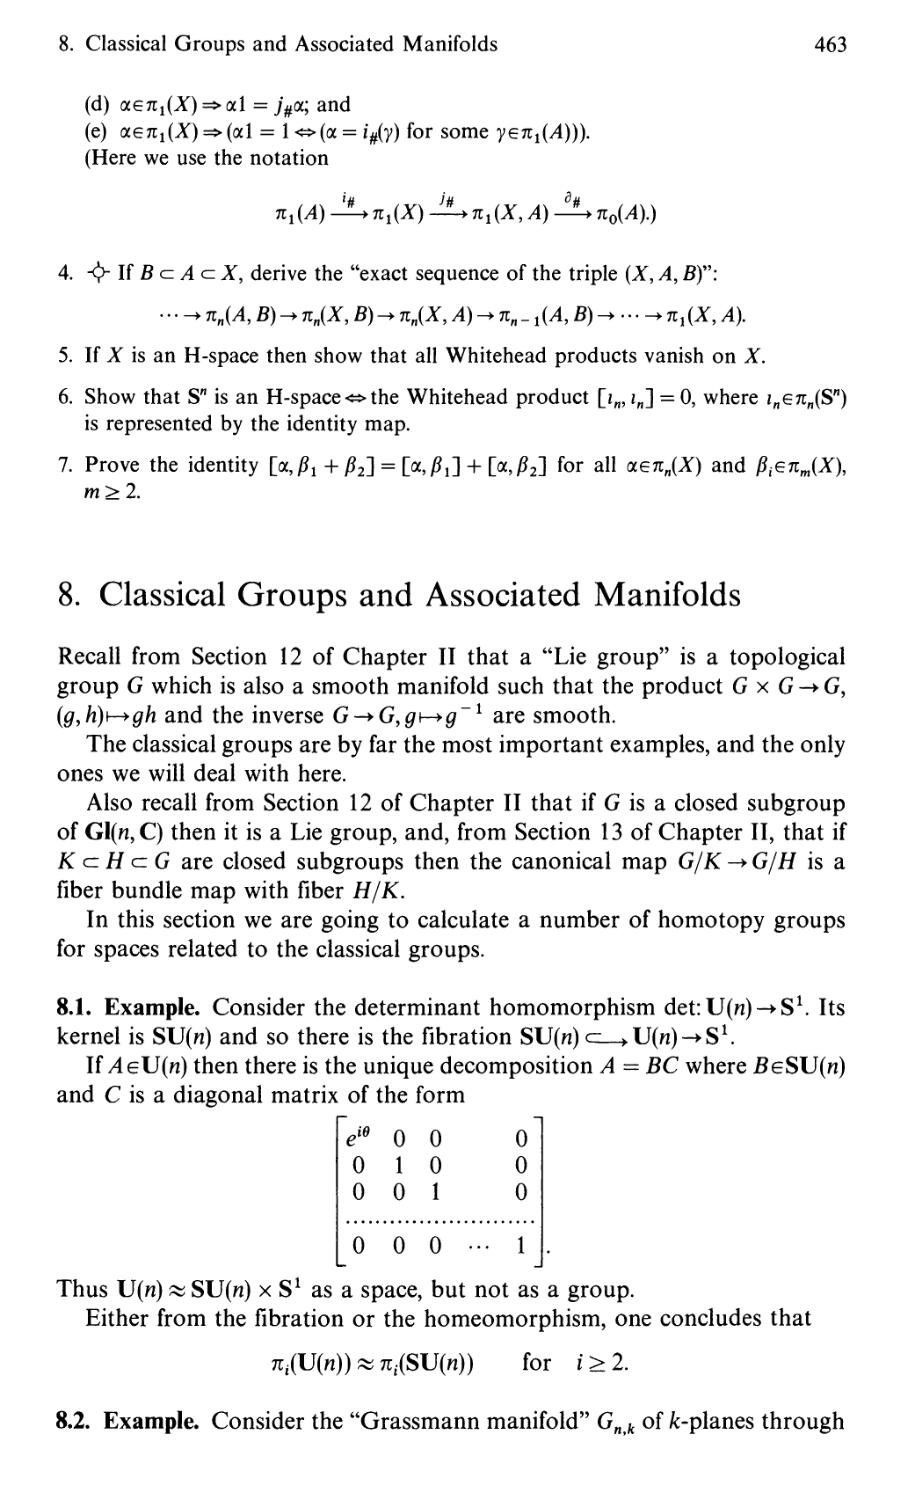 8. Classical Groups and Associated Manifolds